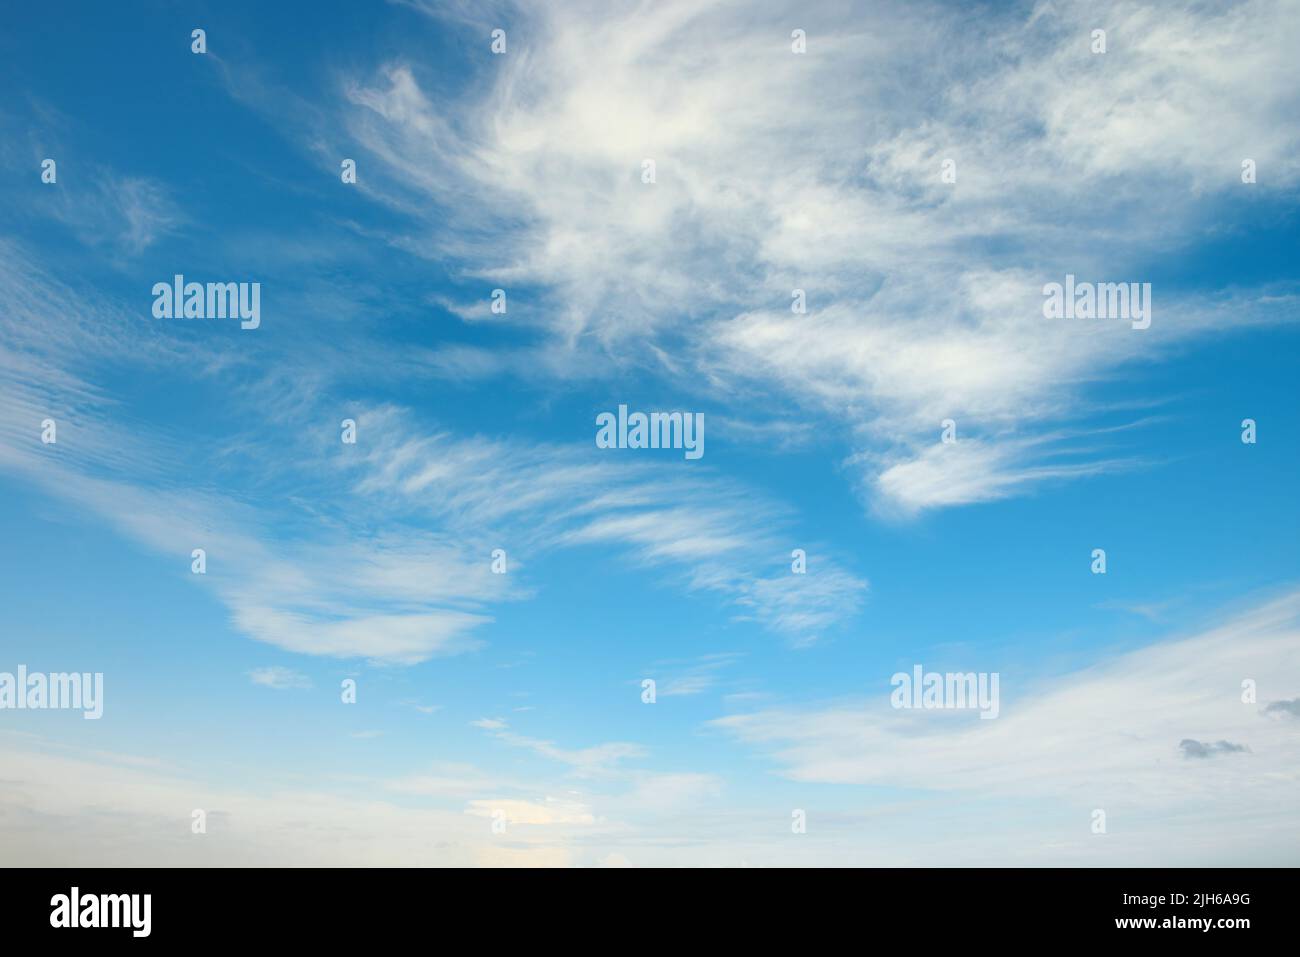 Blue sky with beautiful white clouds. Stock Photo